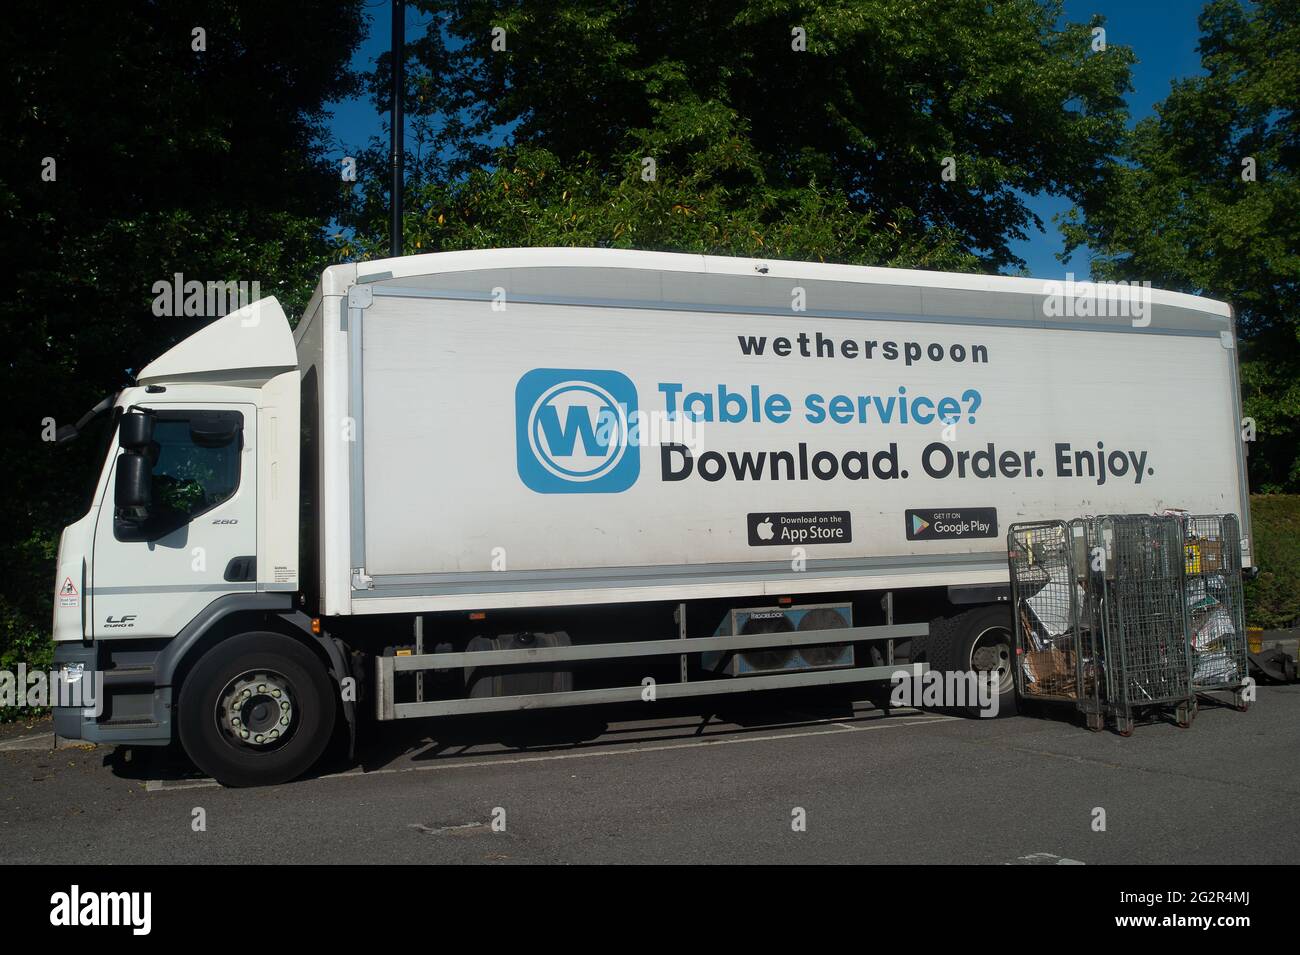 Windsor, Berkshire, UK. 9th June, 2021. A Wetherspoon truck in Windsor Tim Martin the boss of pub chains Wetherspoon is reported to be urging the Governemtn to increase the number workers